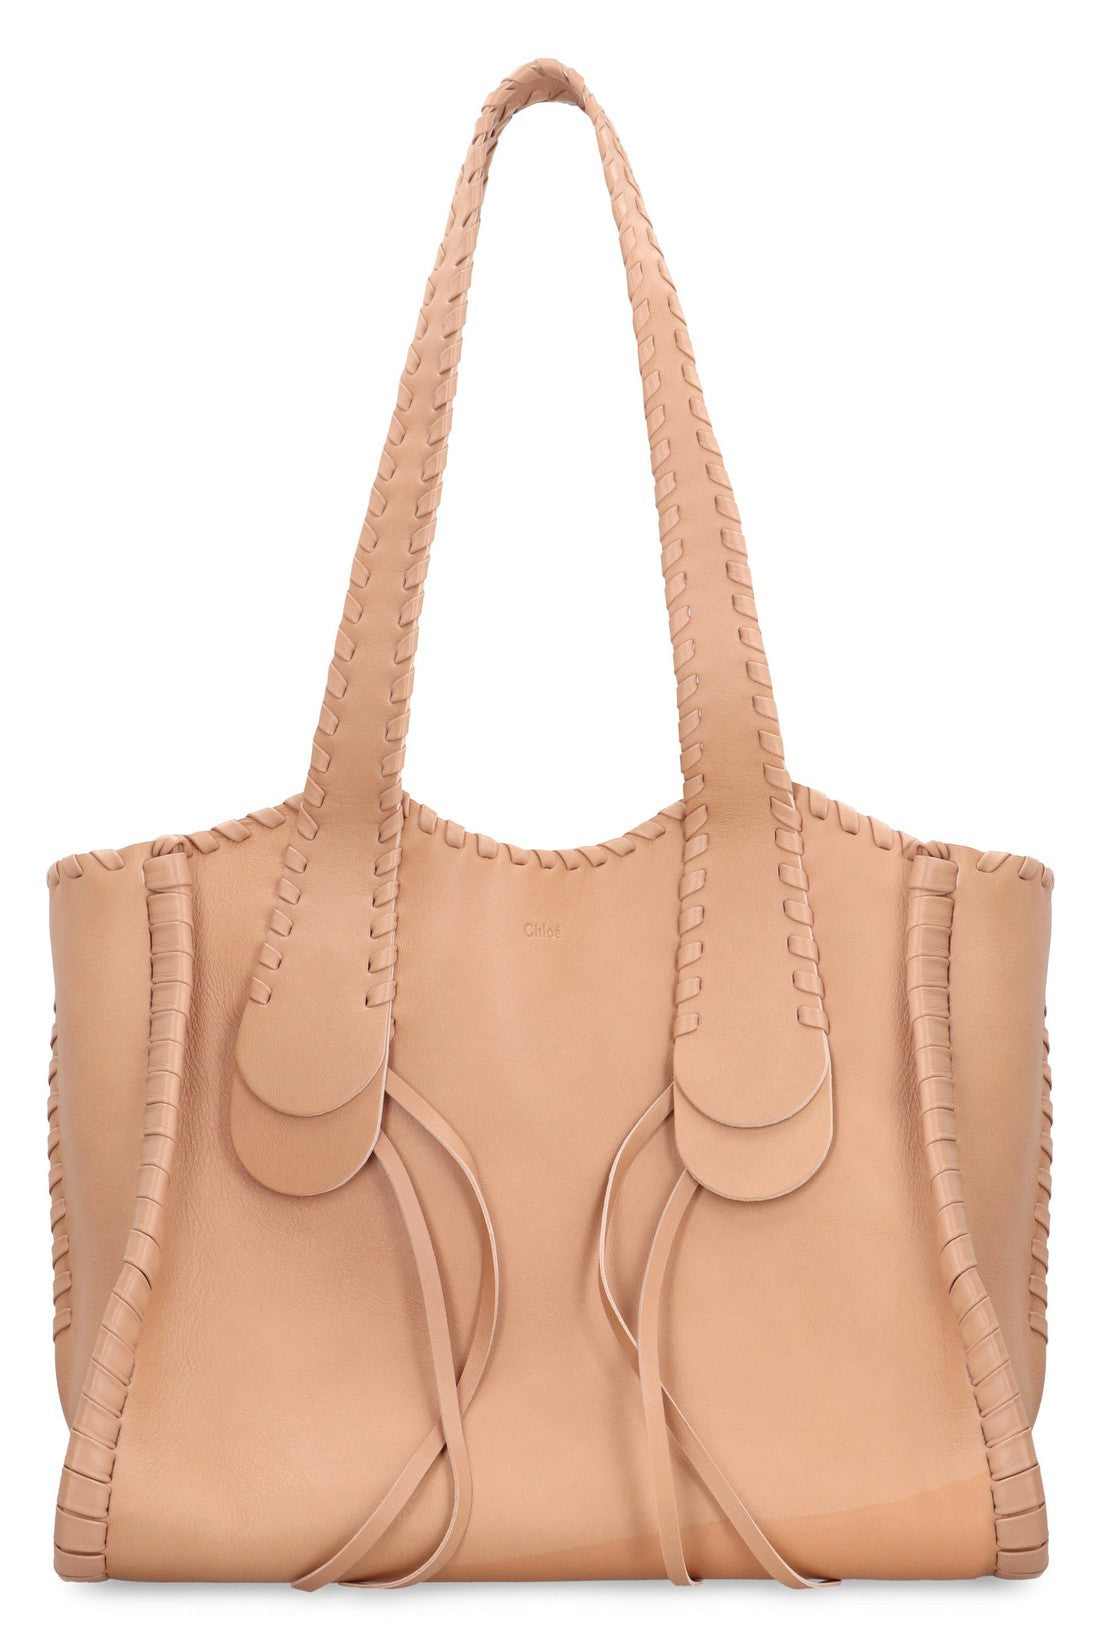 Chloé-OUTLET-SALE-Mony Smooth leather tote bag-ARCHIVIST